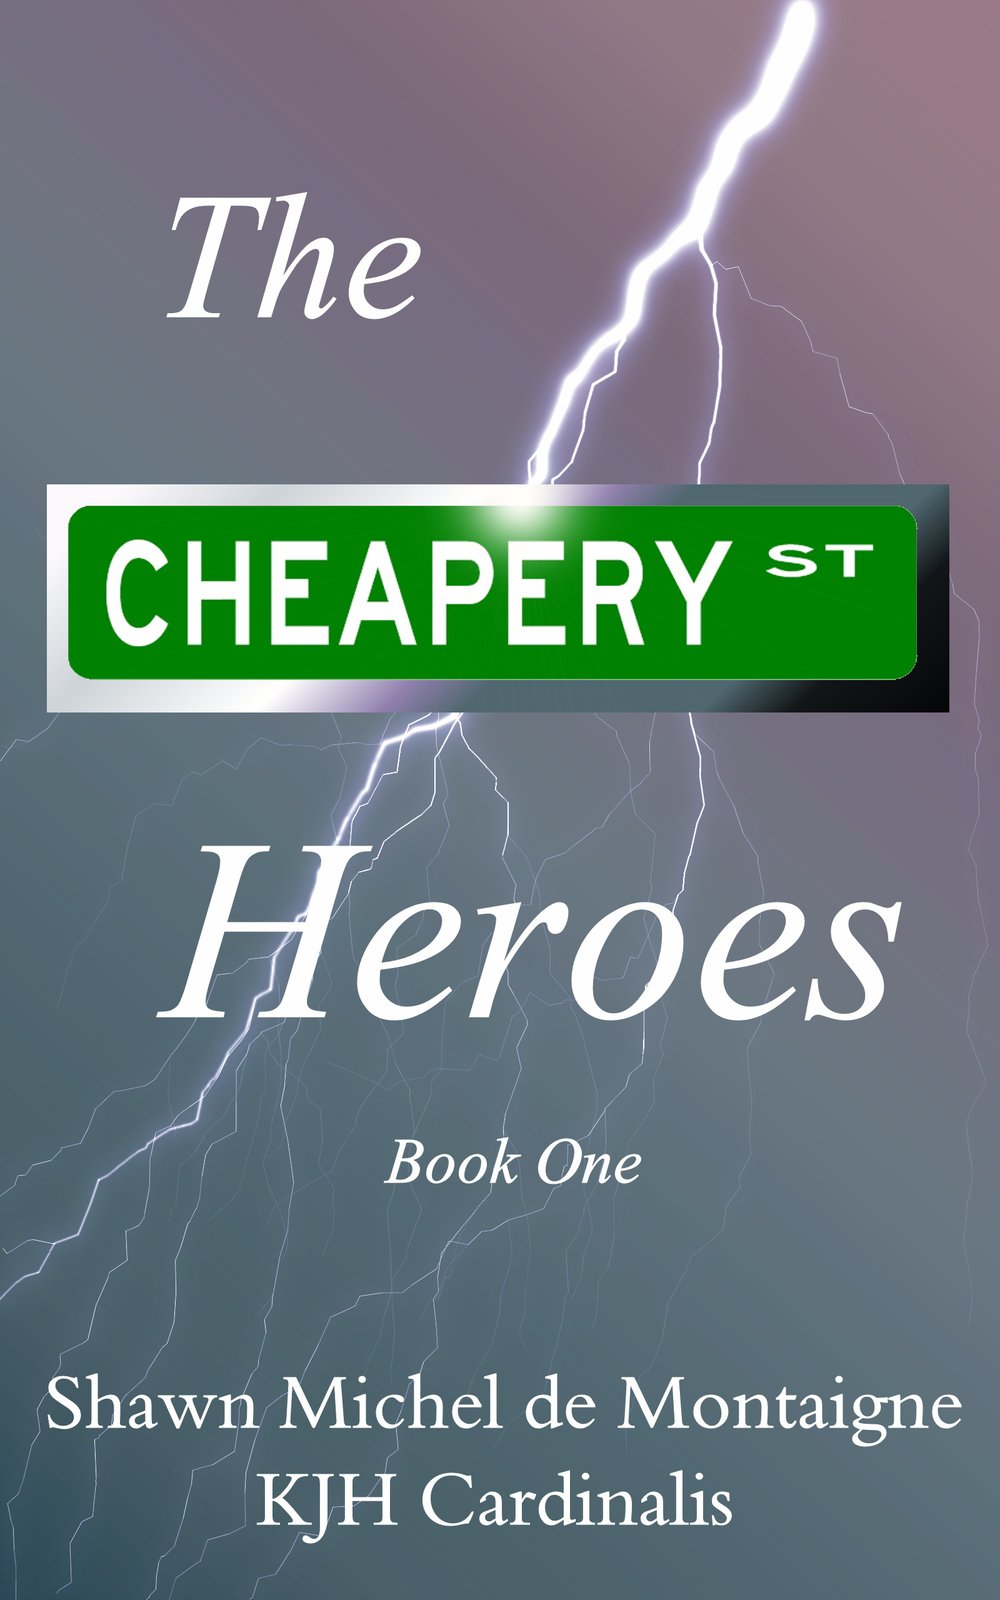 The Cheapery St. Heroes by Shawn Michel de Montaigne & KJH Cardinalis